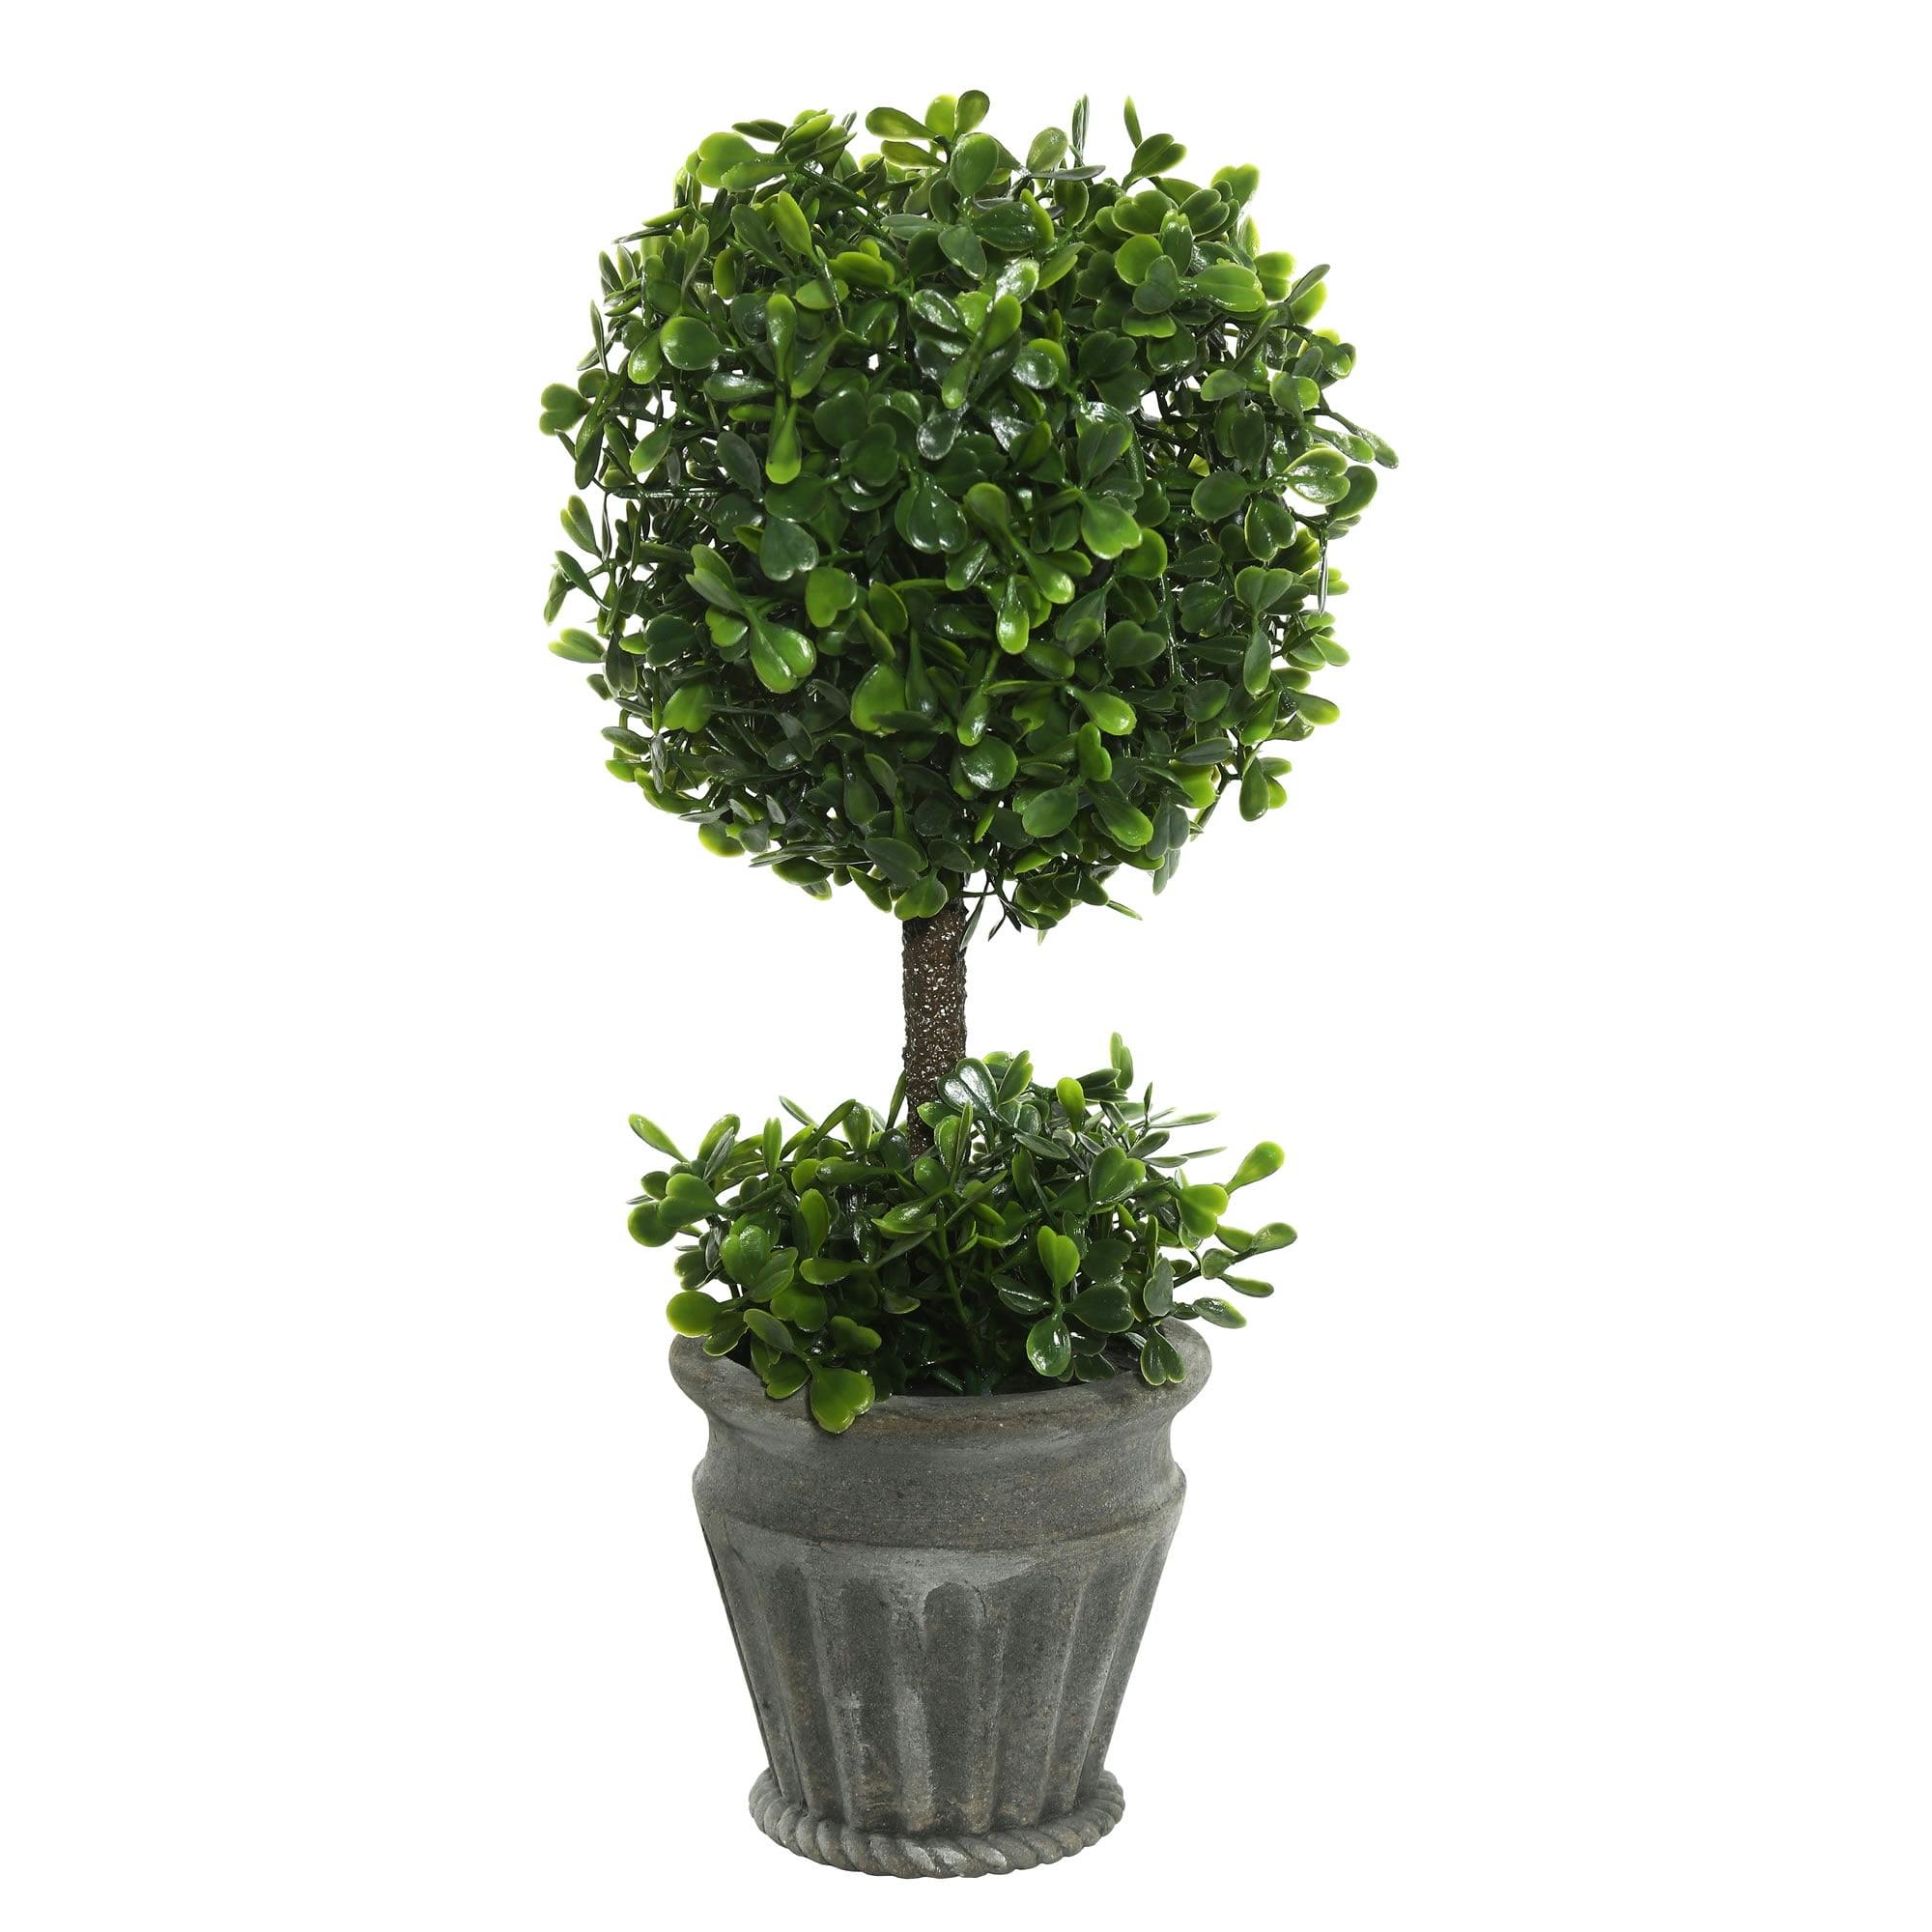 Elegant 13" Green Boxwood Potted Topiary for Outdoor Use